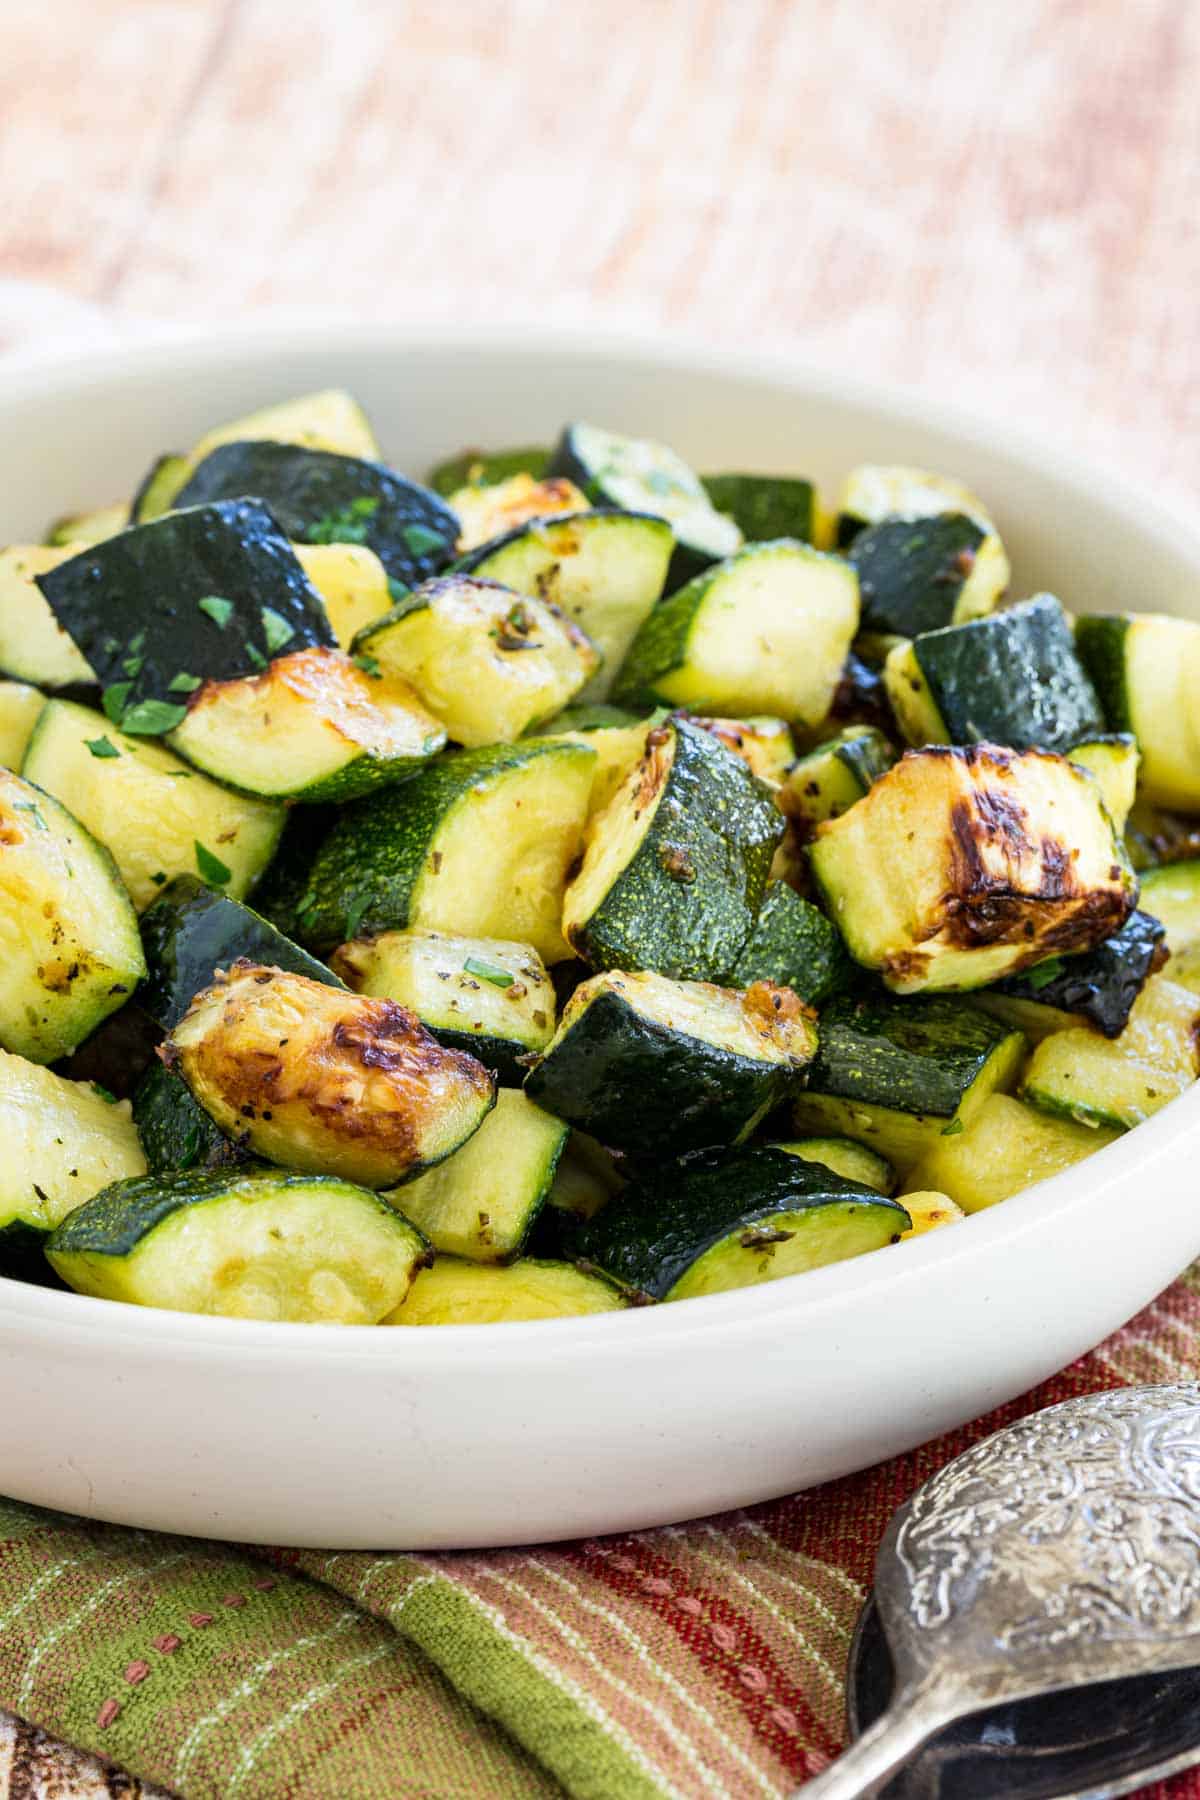 Roasted air fryer zucchini pieces in a white serving bowl.